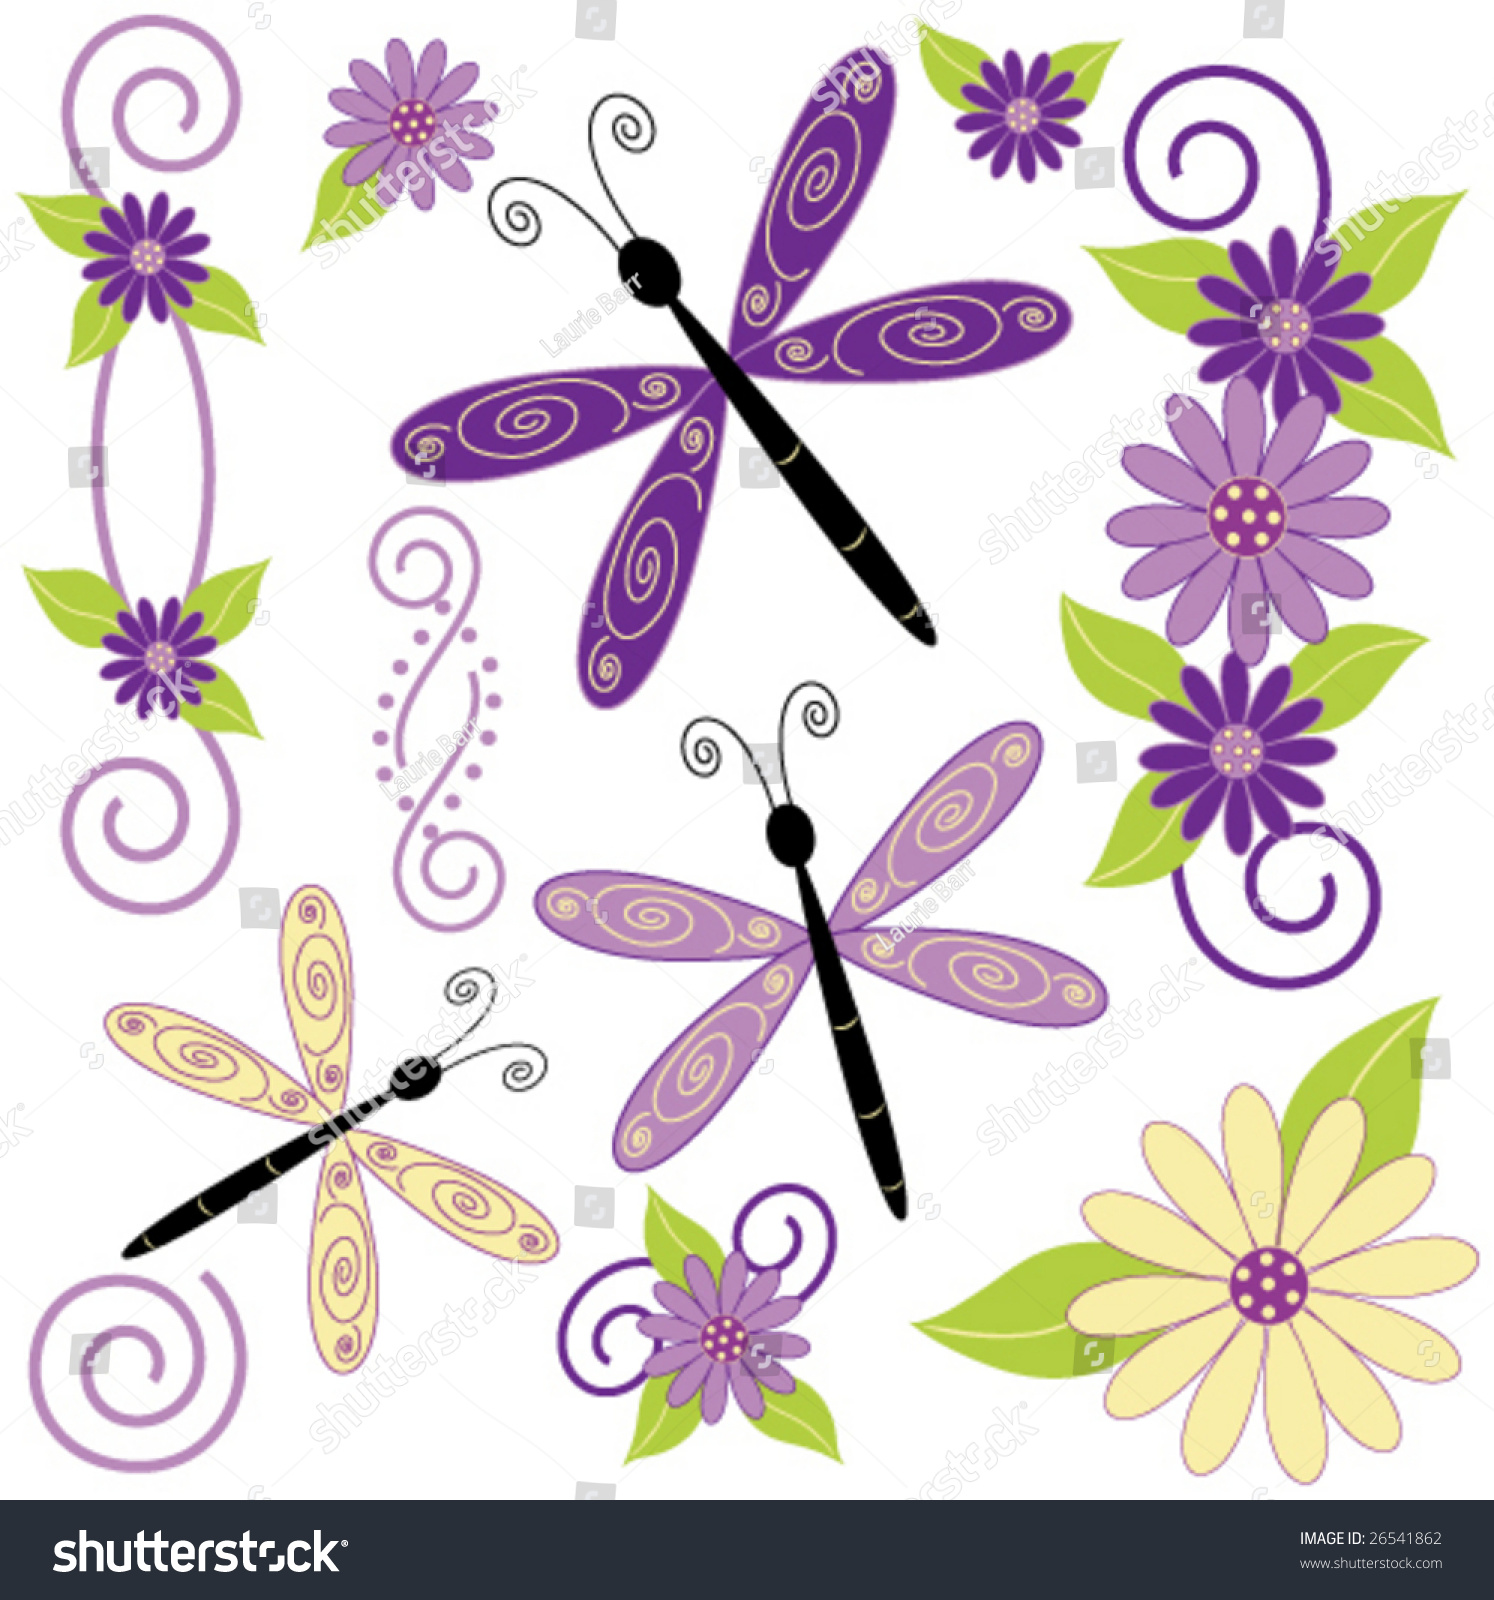 Dragon Fly And Flower Vector. - 26541862 : Shutterstock